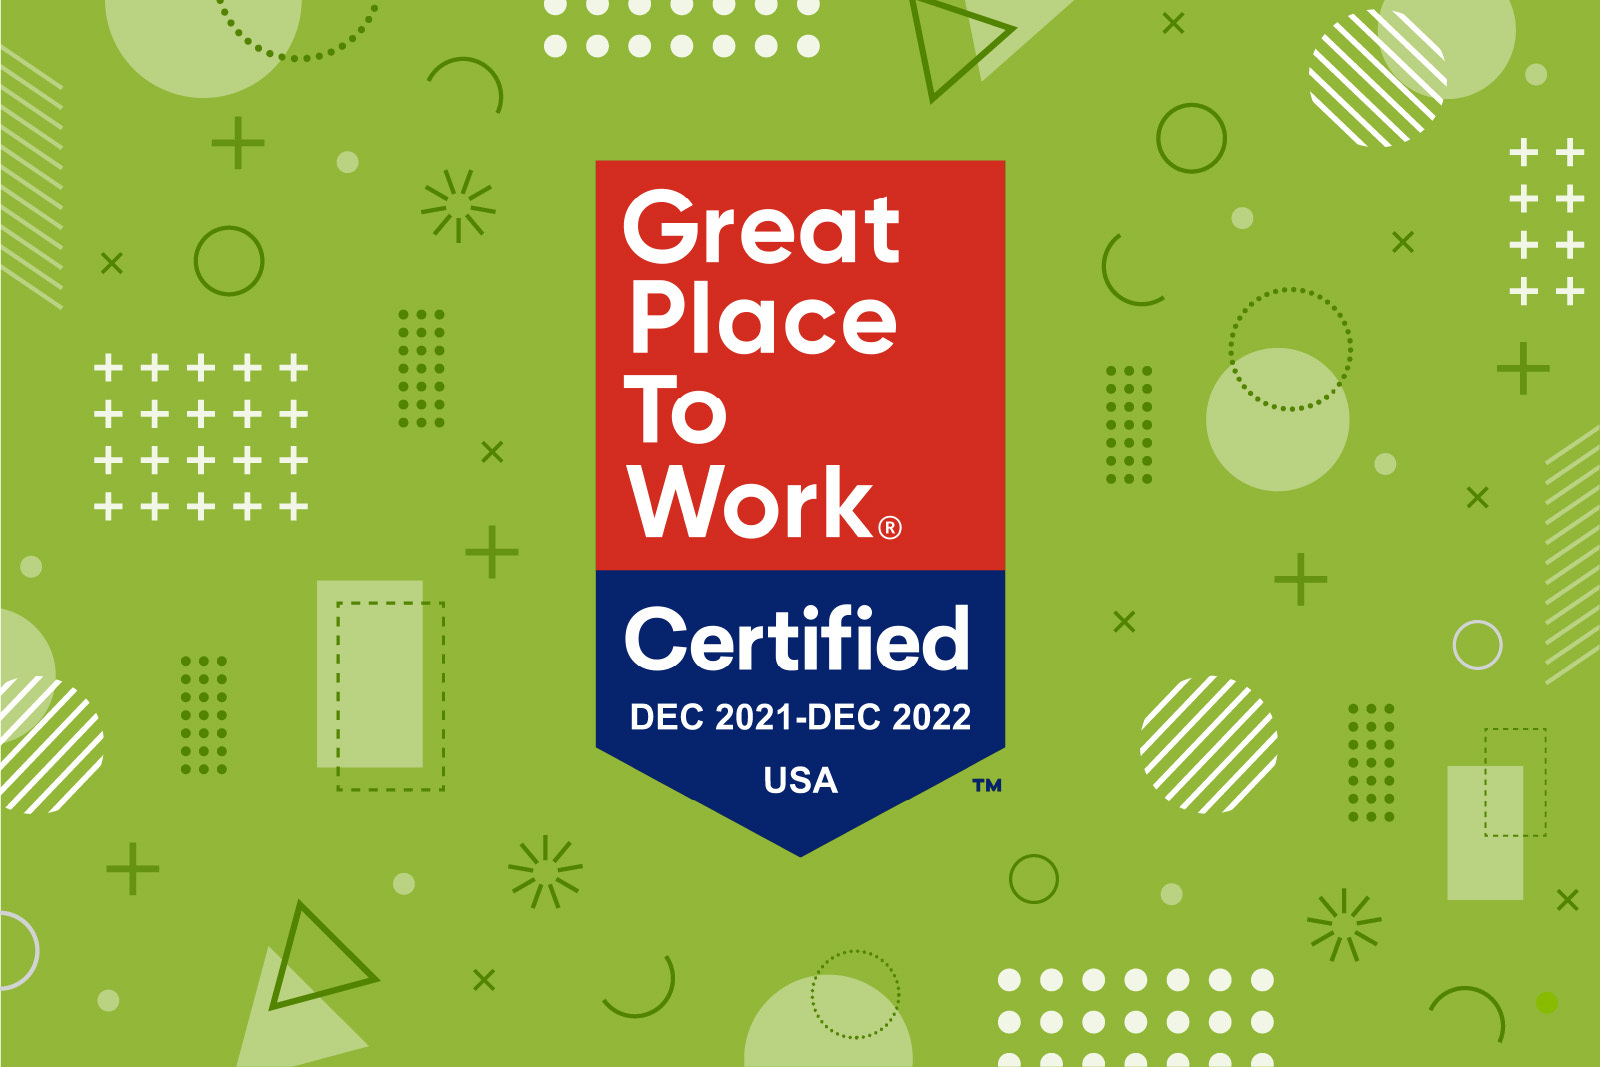 Great Place To Work Certification Logo